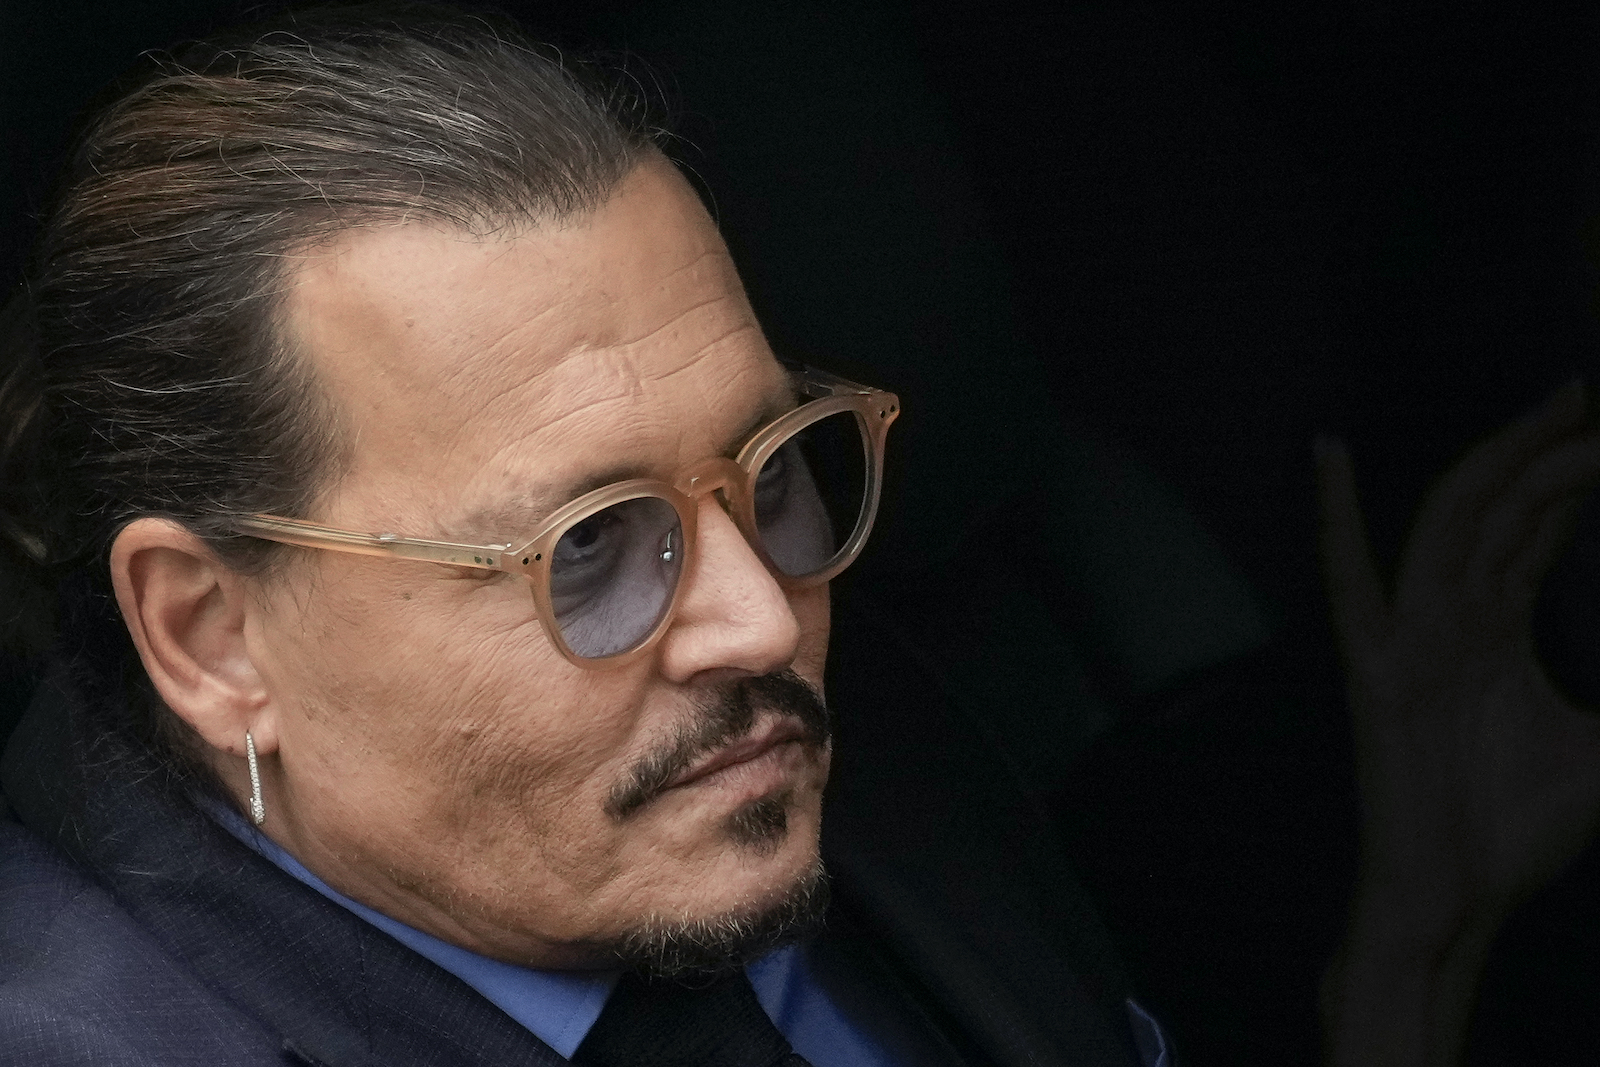 Johnny Depp is photographed in his car leaving the Johnny Depp vs. Amber Heard trial